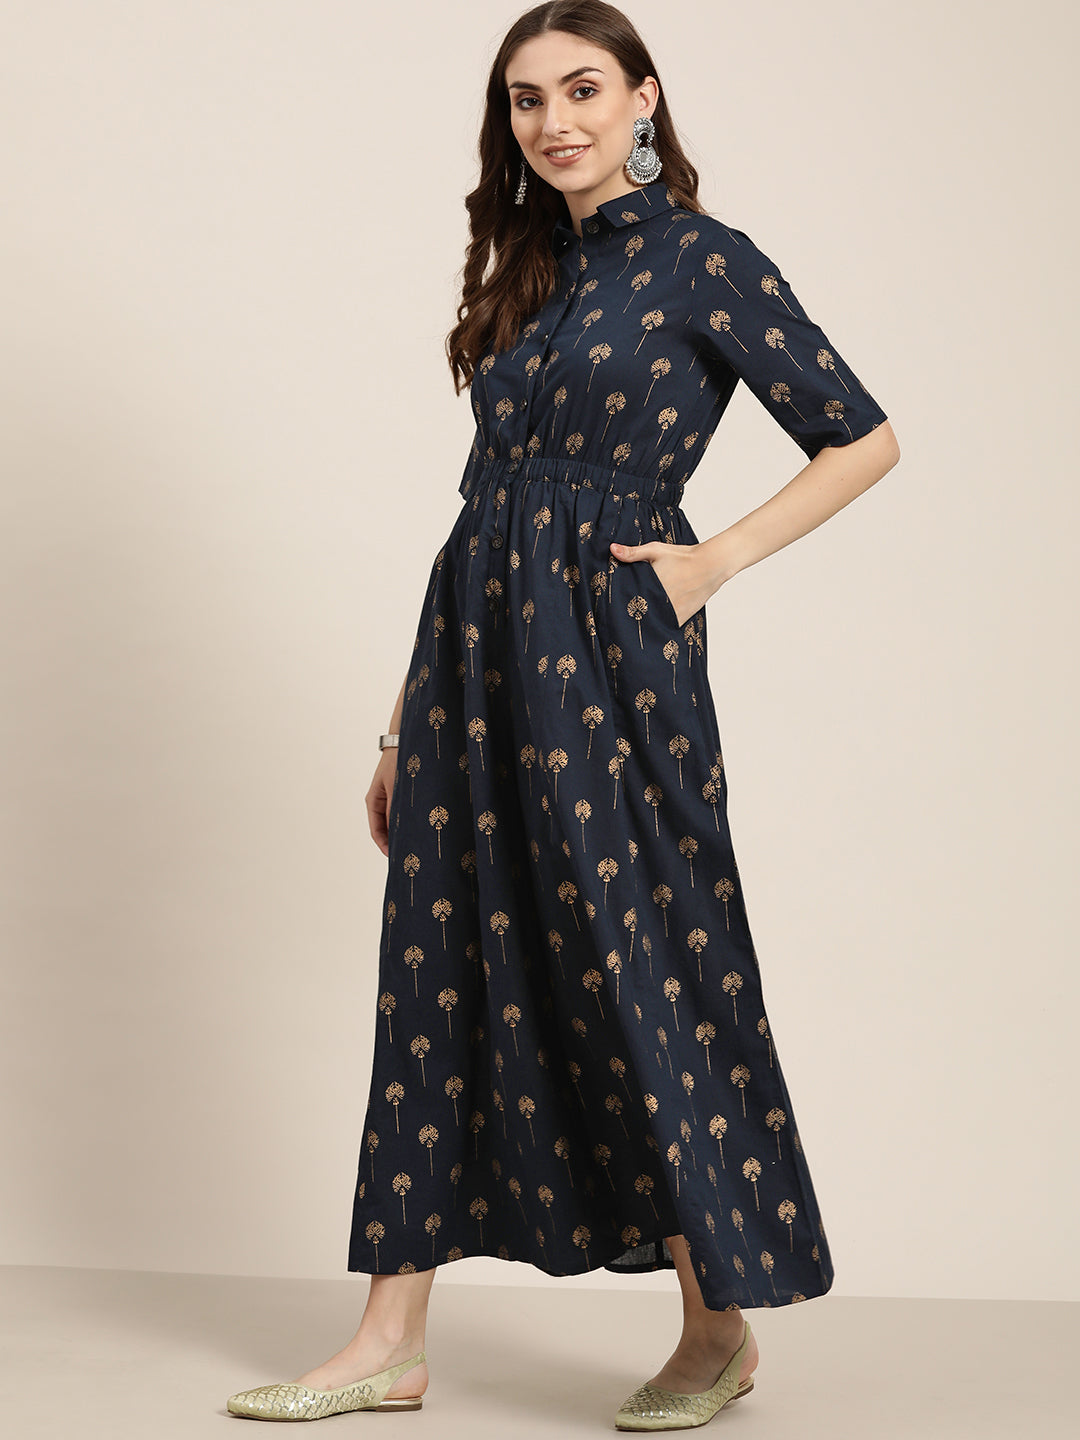 Blue Gold Print Cotton Waist Elasticated Flared Jumpsuit Has Spread Collar With Front Button Opening, Elastic At Waist, Elbow Sleeves, Flared Hemline.